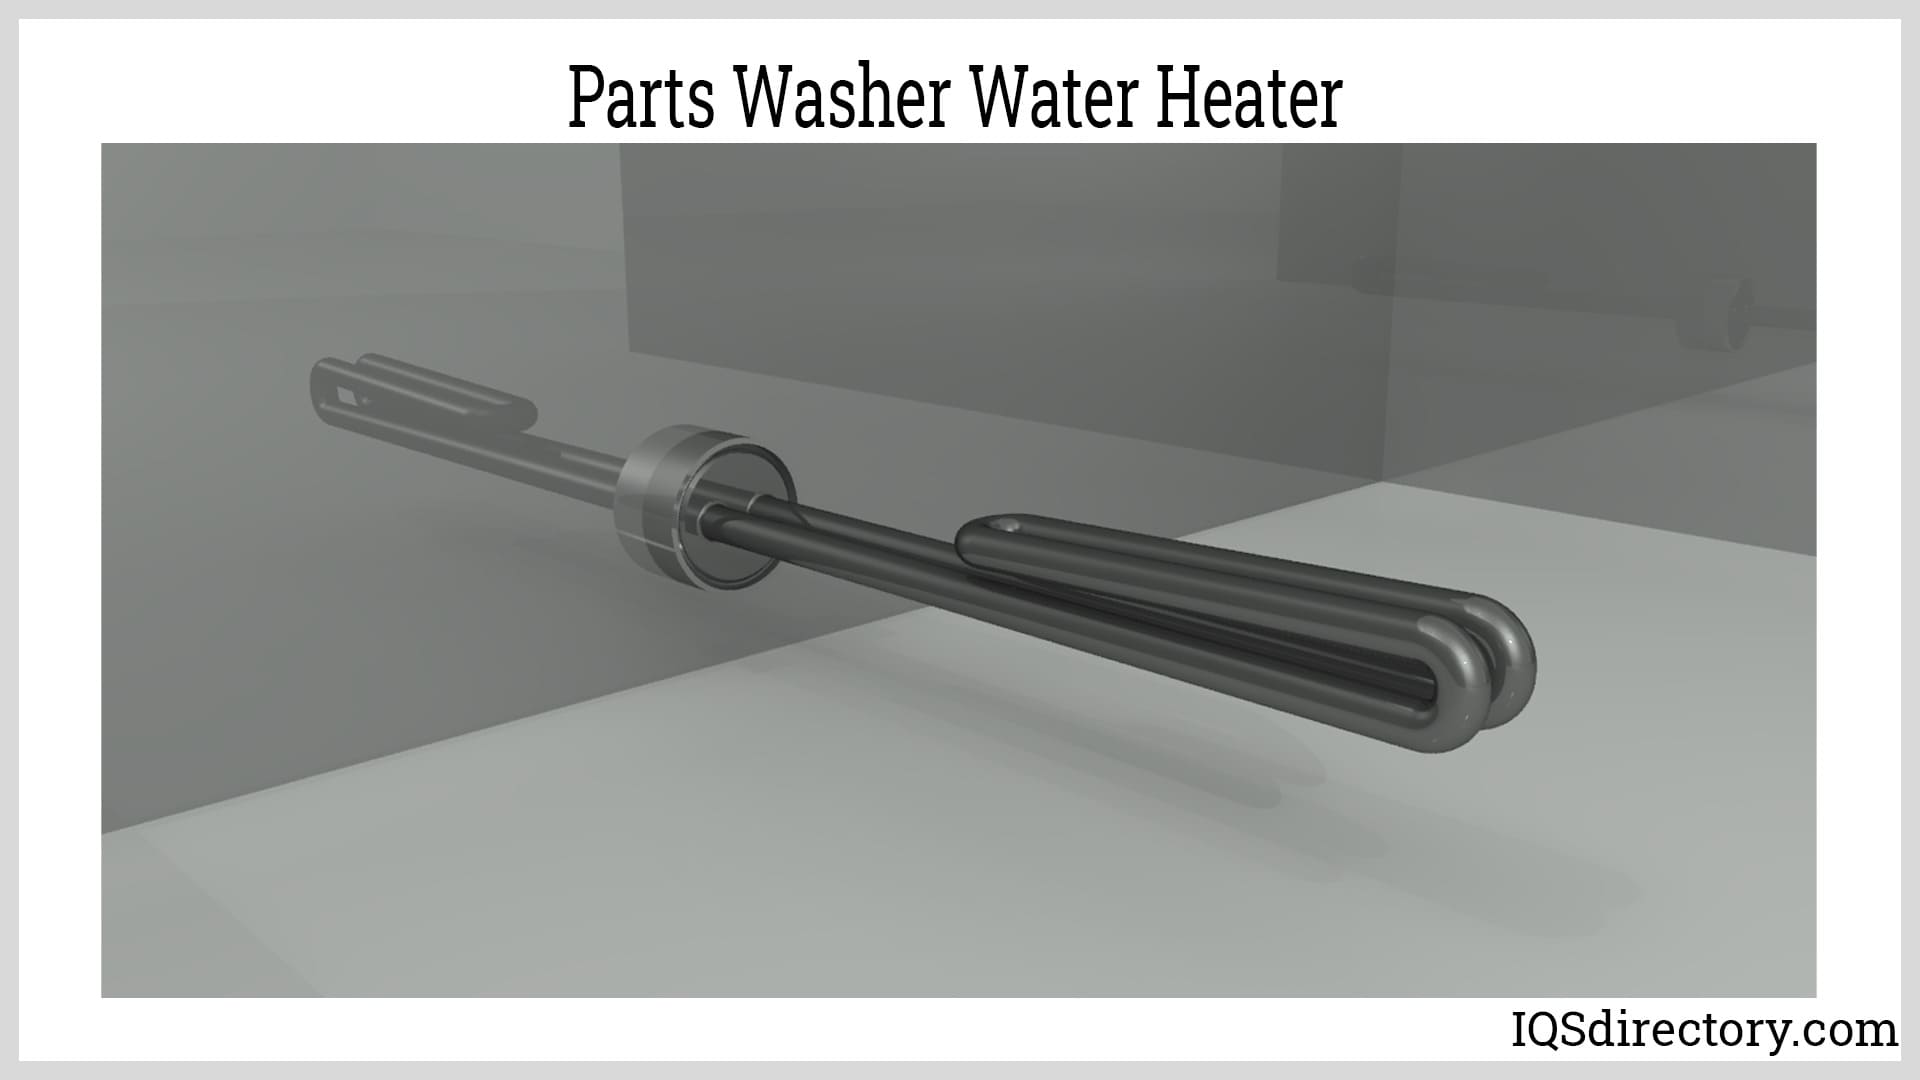 Parts Washer Water Heater